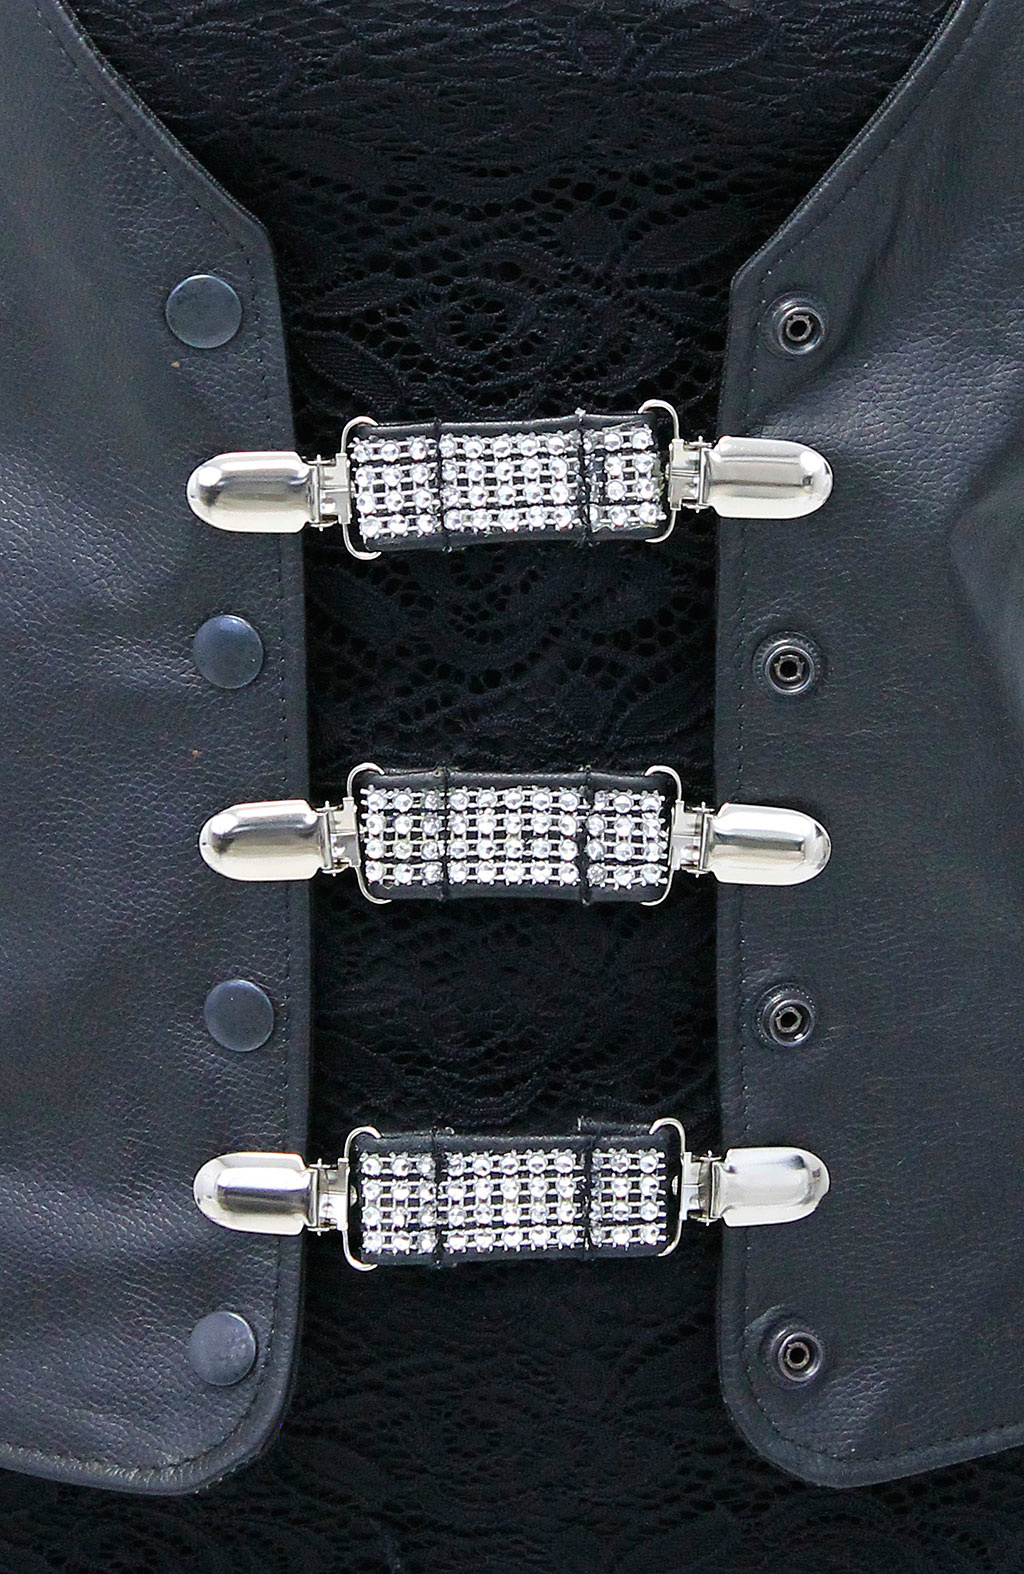 Zipper extenders for boots or pants